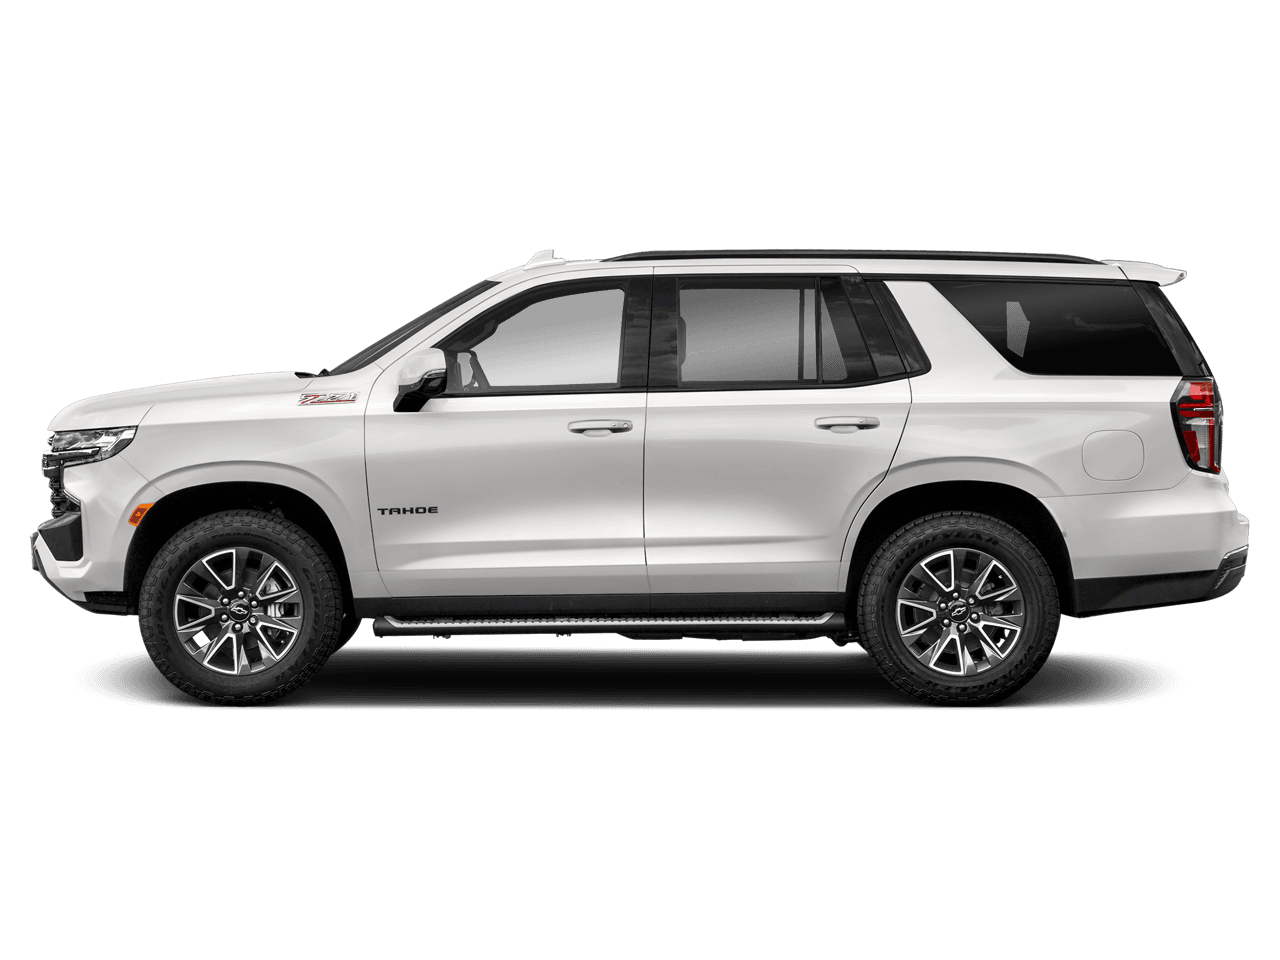 2021 Chevrolet Tahoe Photo in Wooster, OH 44691